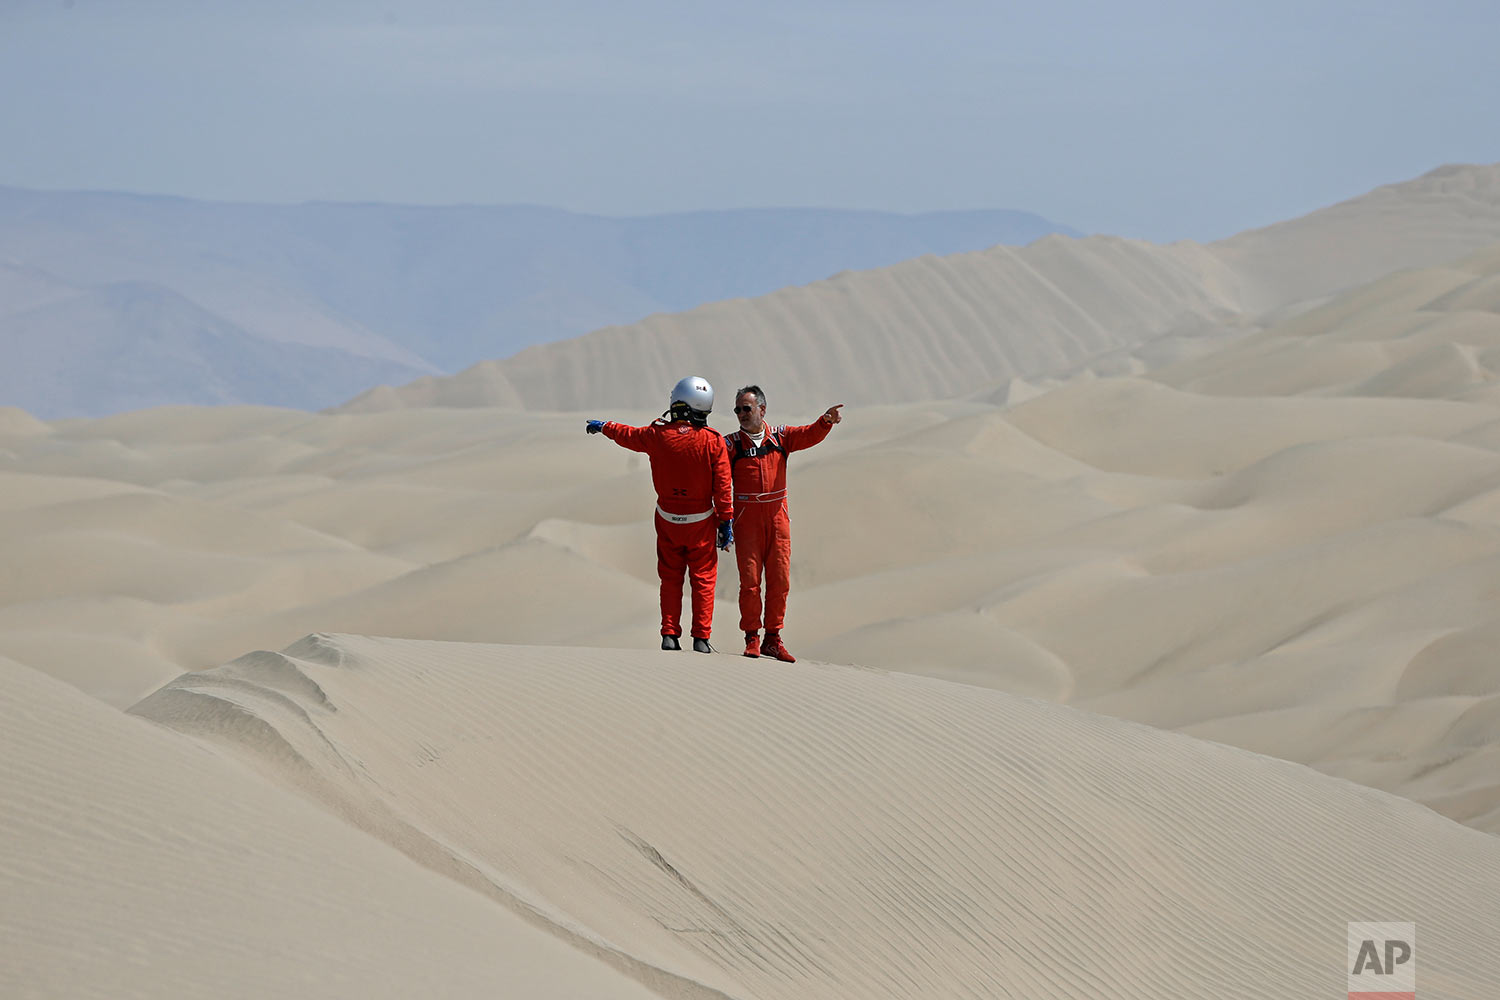  In this Wednesday, Jan. 10, 2018 photo, Philippe Raud, of France, right, and Miguel Angel Alvarez Pineda, of Peru, both drivers of Toyota cars, point in opposite directions as they try to determine their way across the dunes during stage 5 of the Da